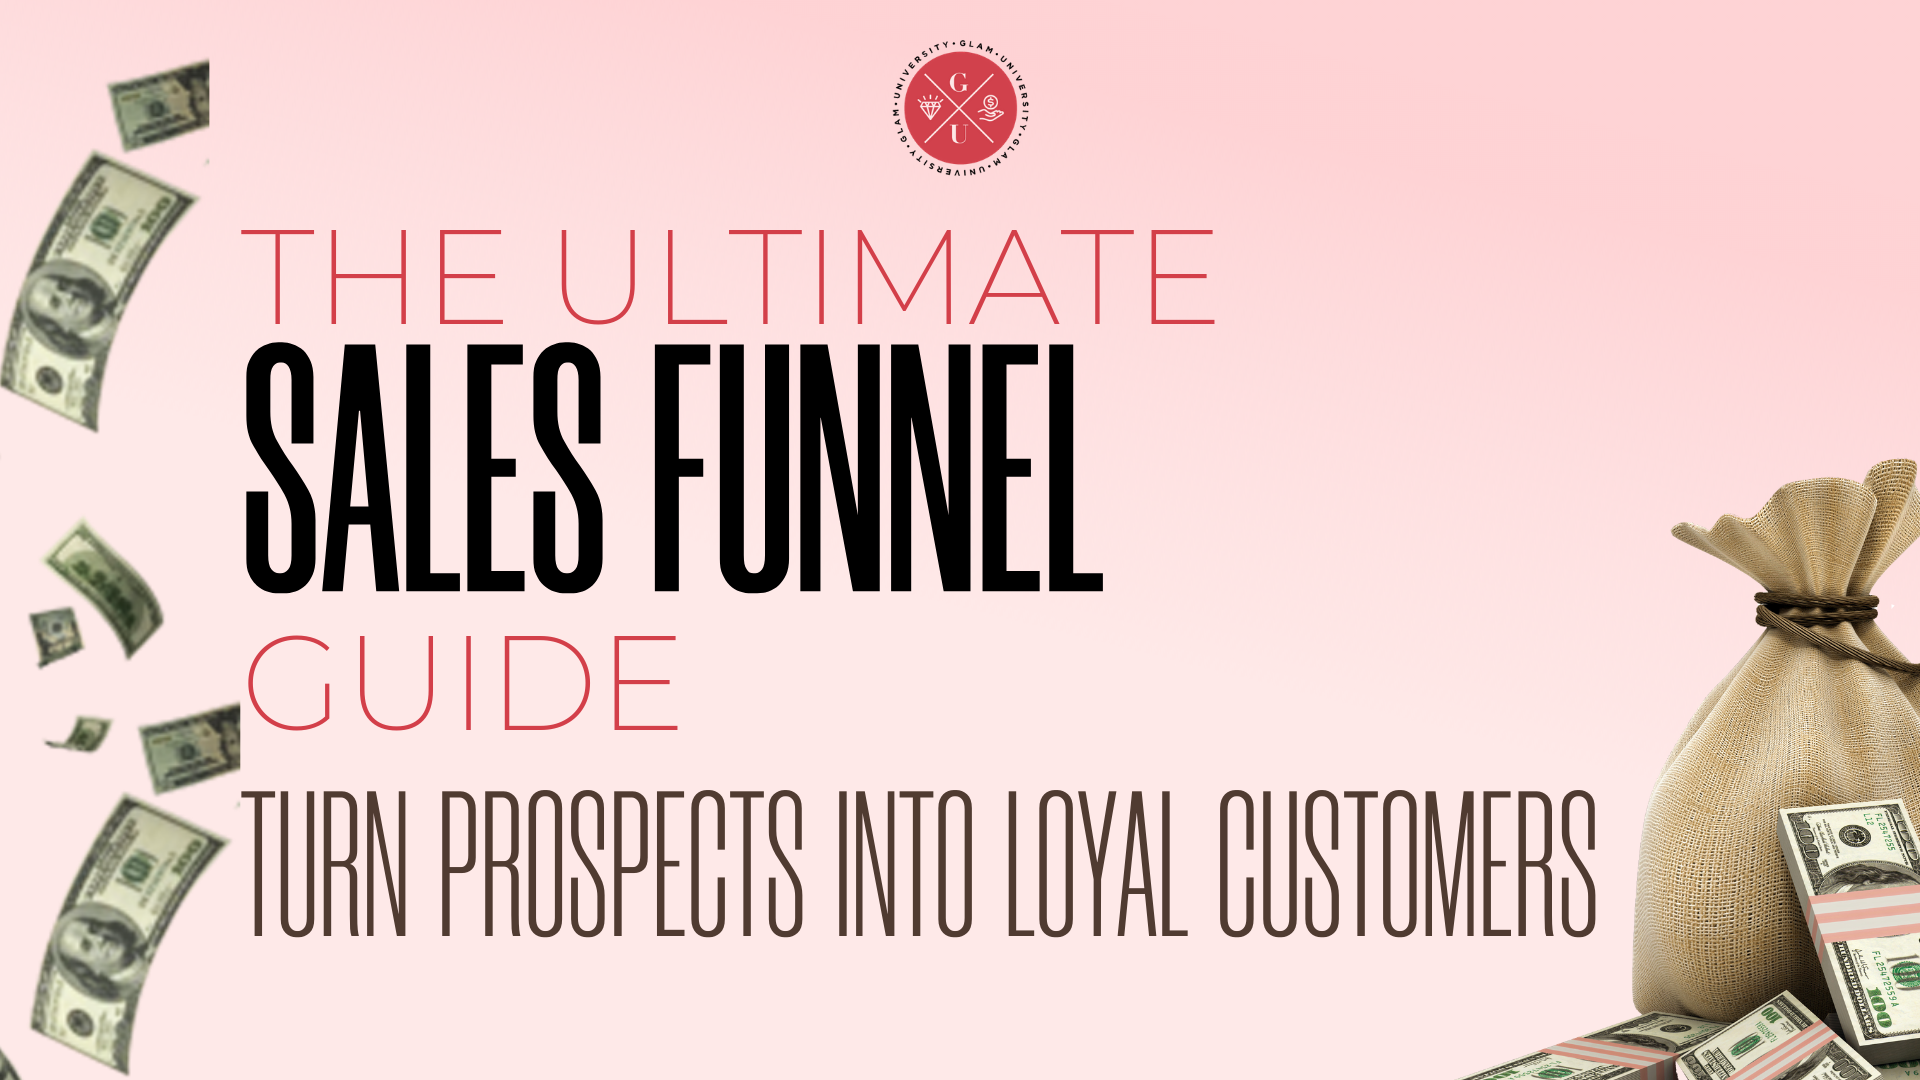 The Ultimate Sales Funnel Guide